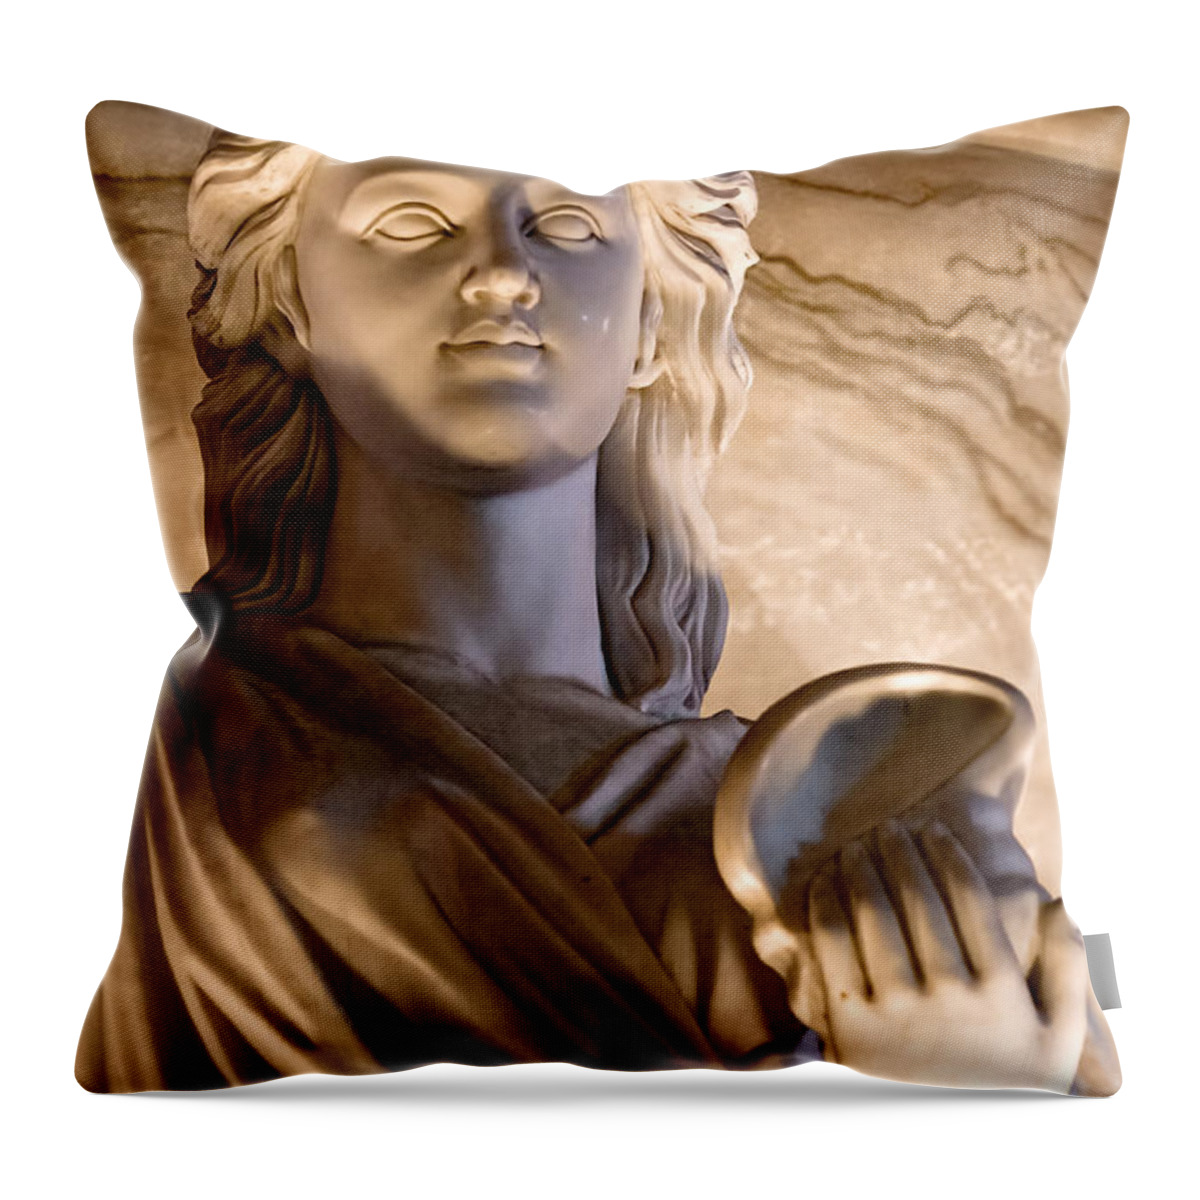 Sculpture Throw Pillow featuring the photograph Shell In Hand by Christopher Holmes